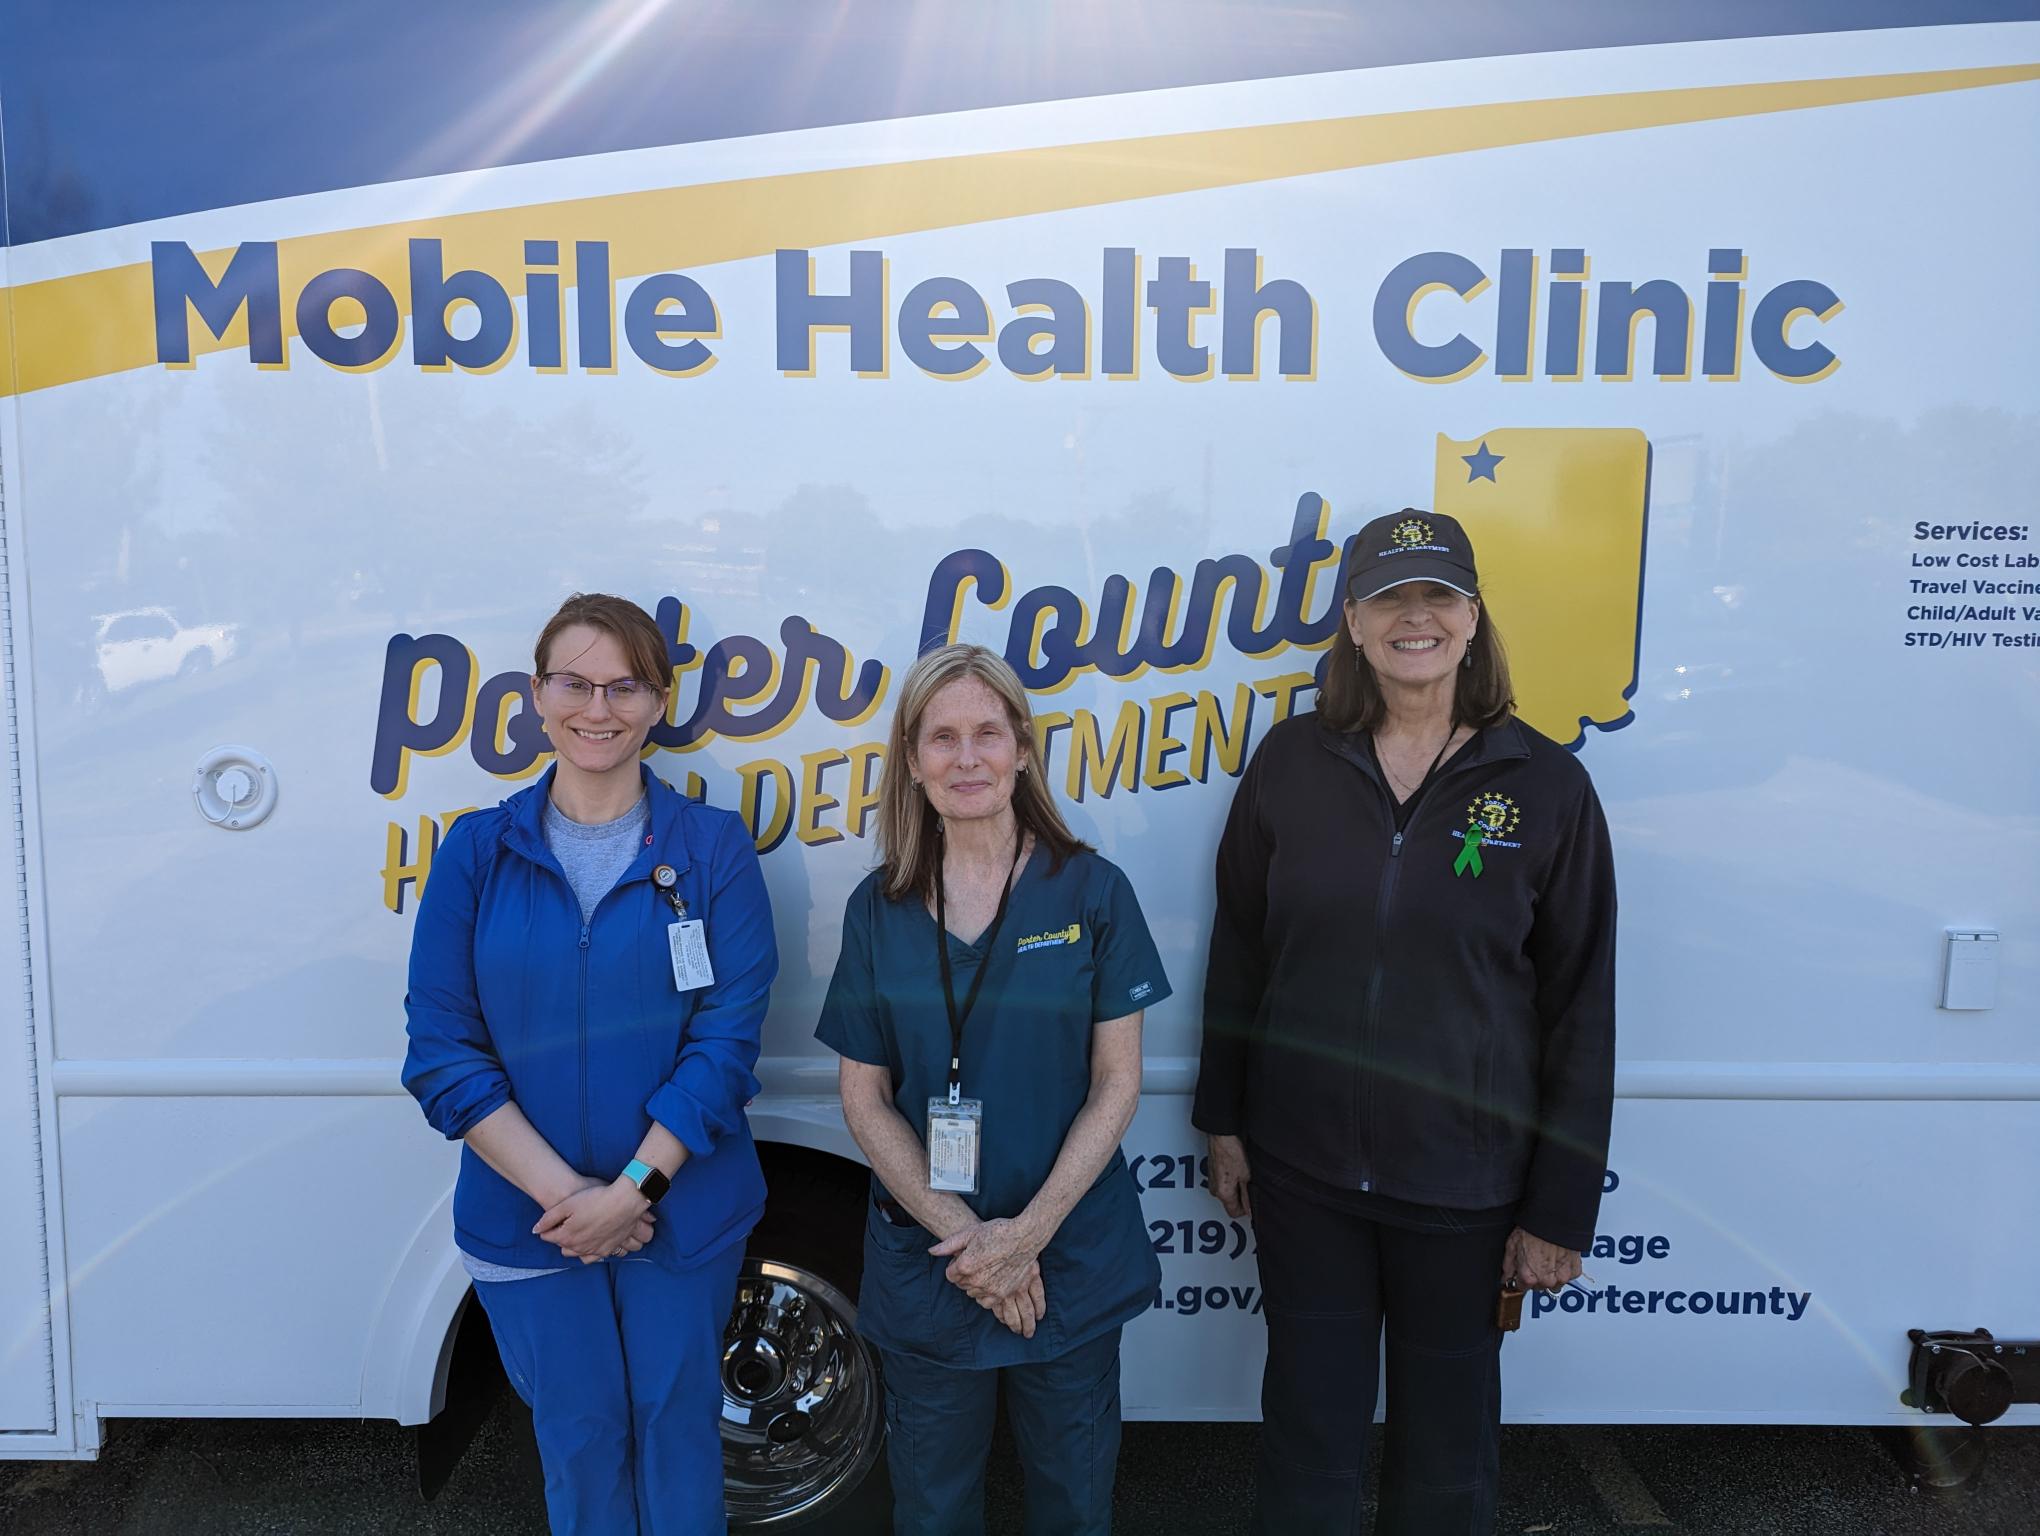 The Porter County Health Department uses the new mobile health clinic for the first time